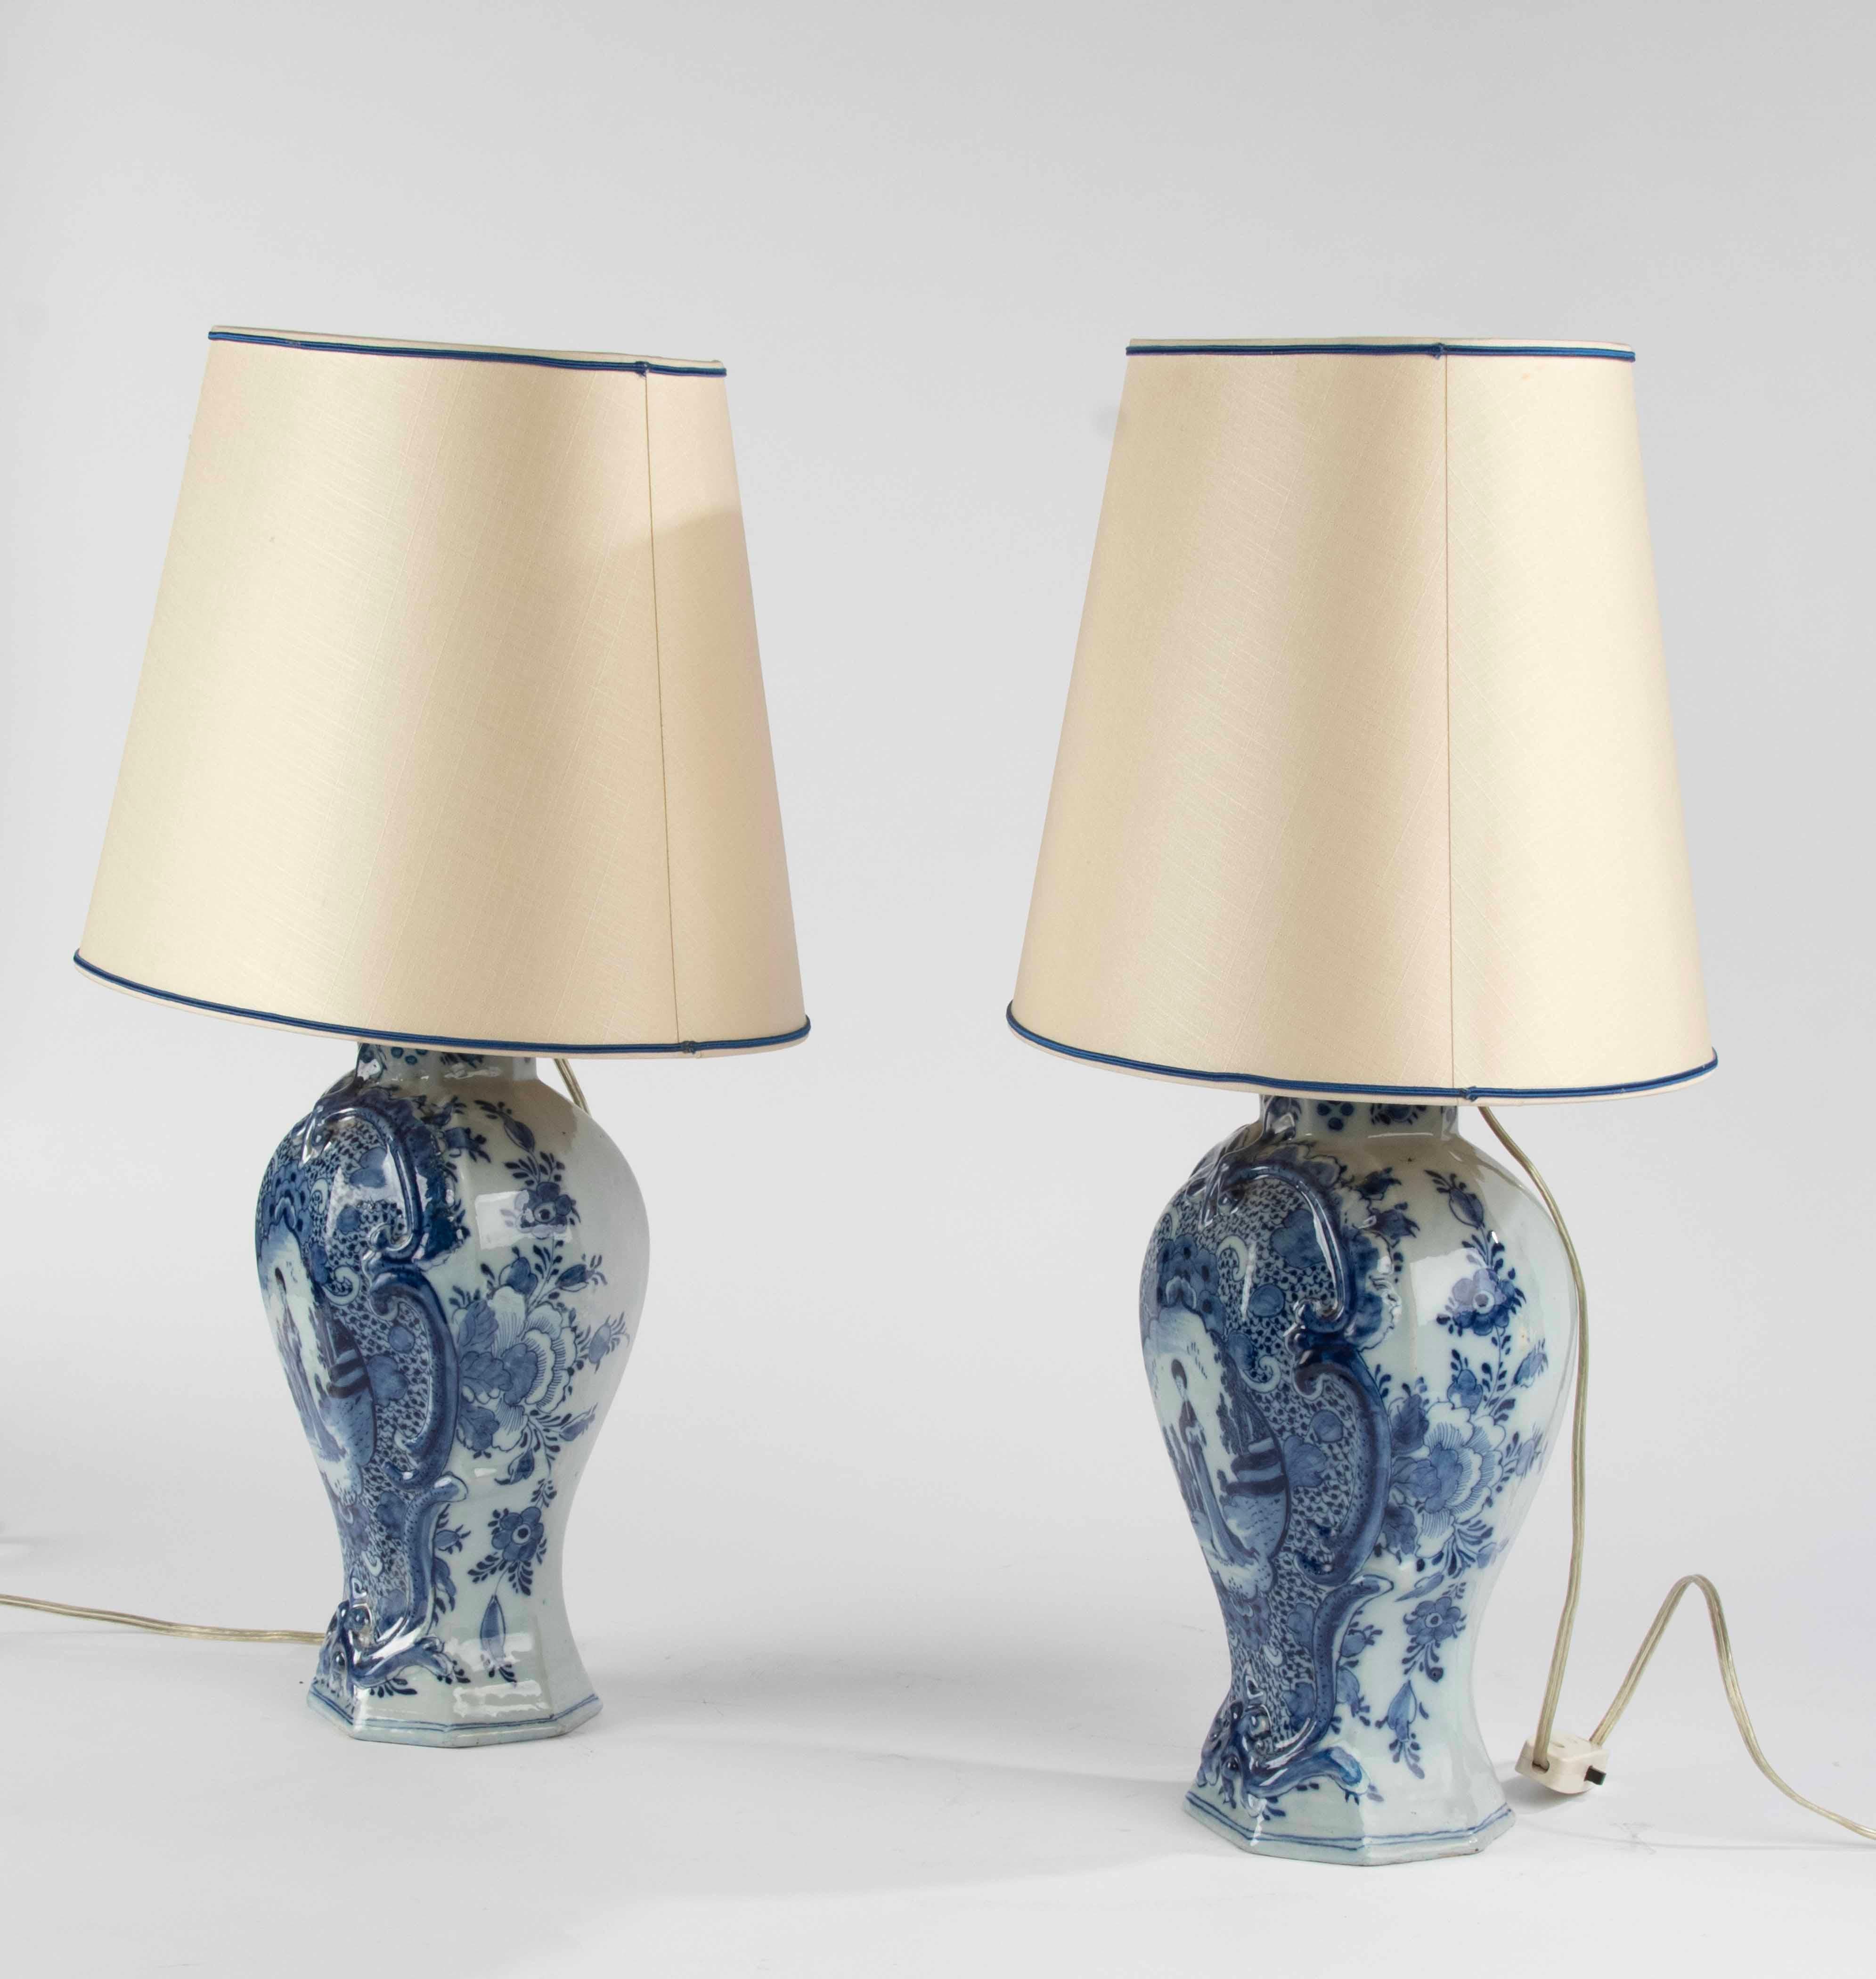 A Pair of Late 18th Century Delft Ceramic Table Lamps - De Klaauw Pottery  In Good Condition For Sale In Casteren, Noord-Brabant